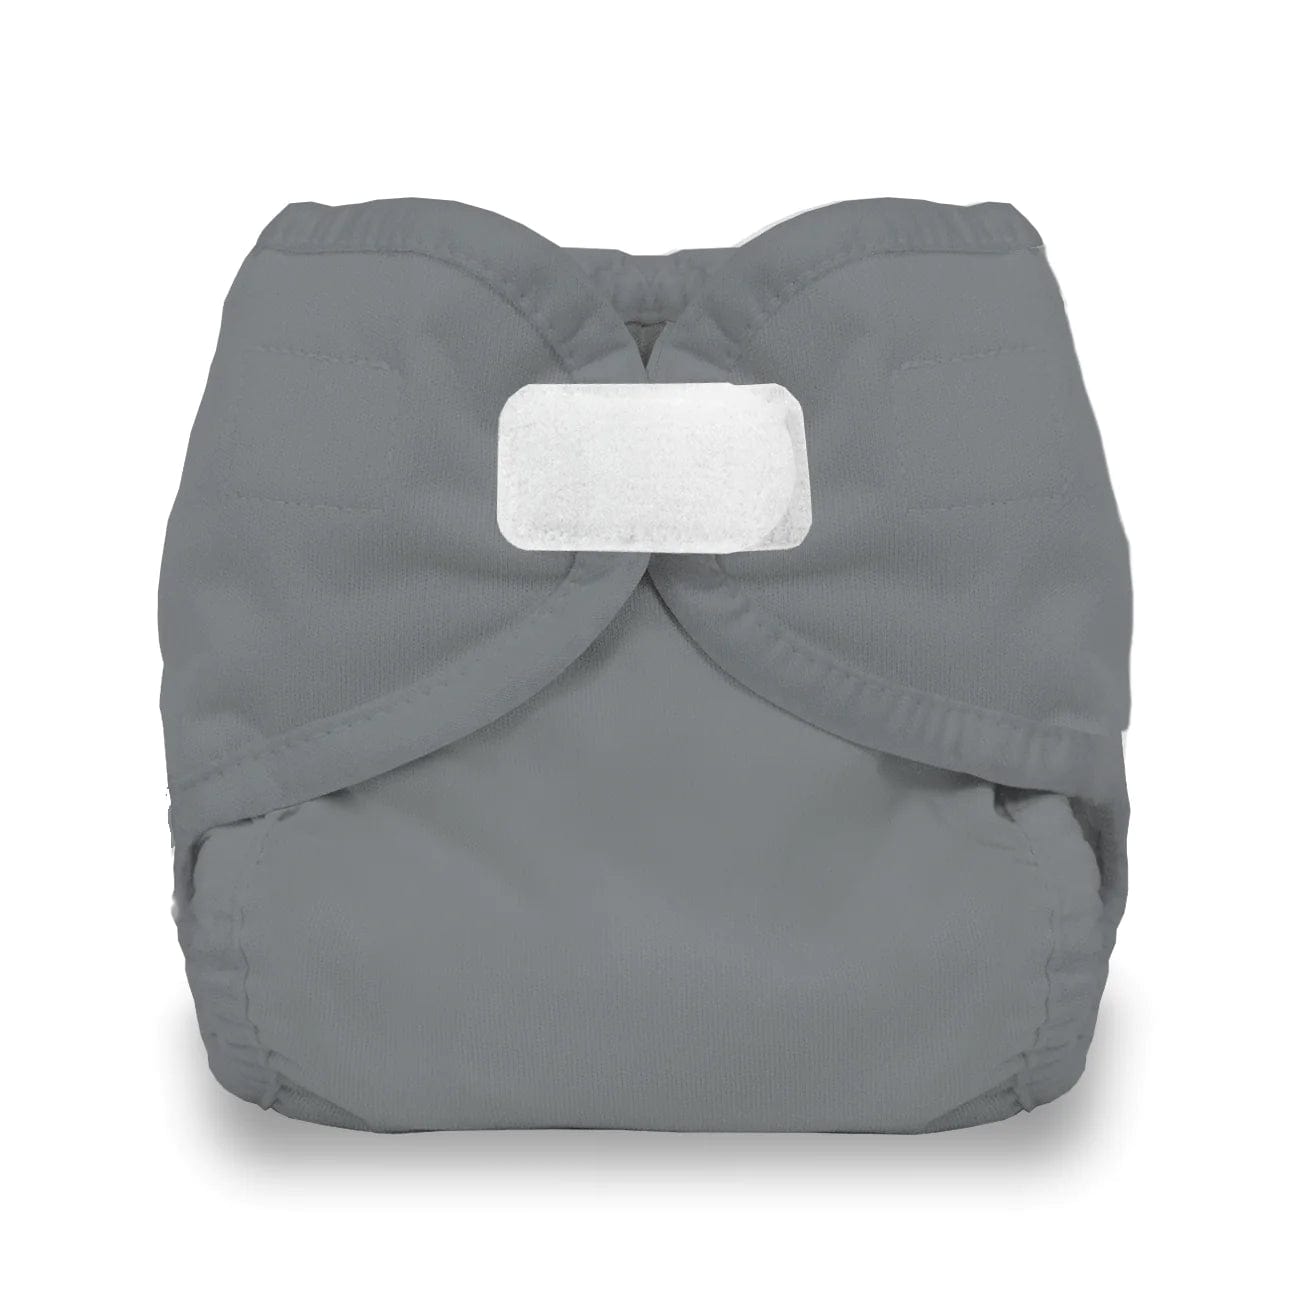 Bonds Babytail Nappy Cover Dark Grey/with stripe - Size 0 at